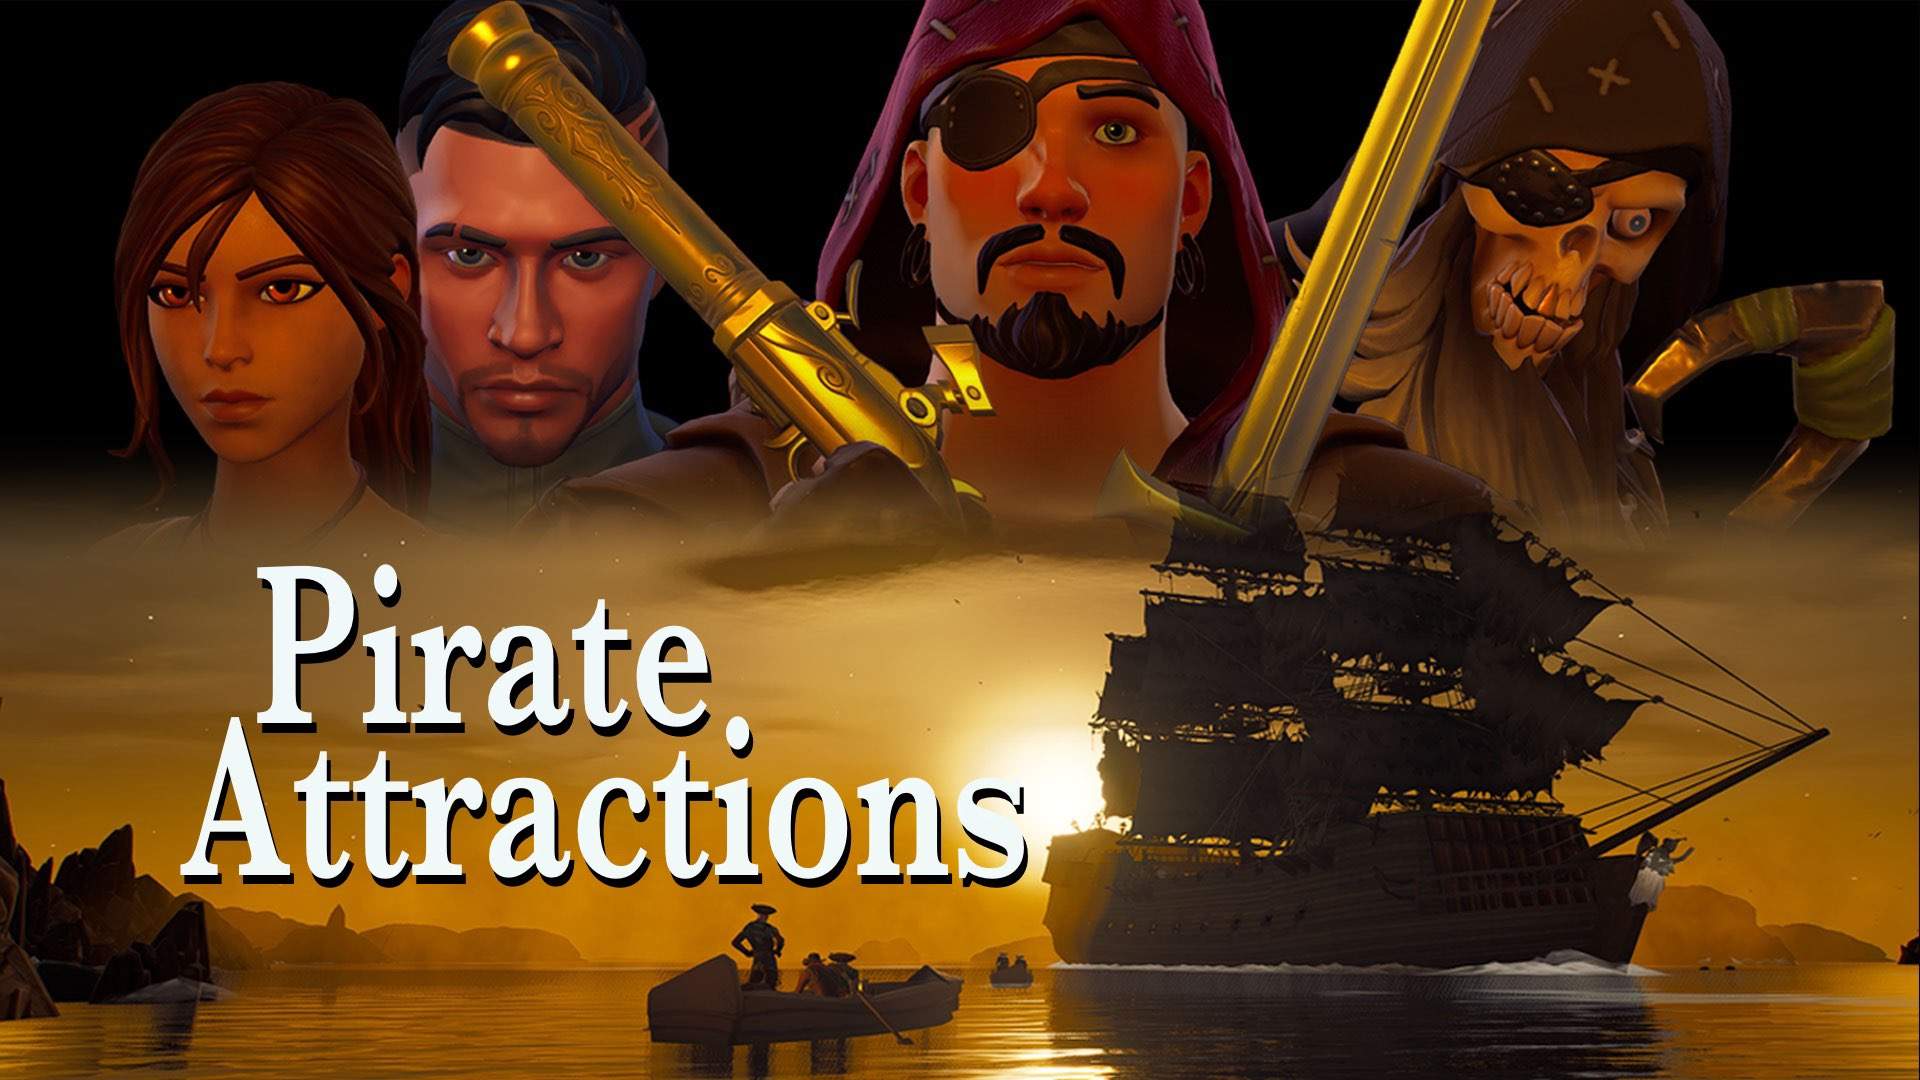 Pirate Attraction